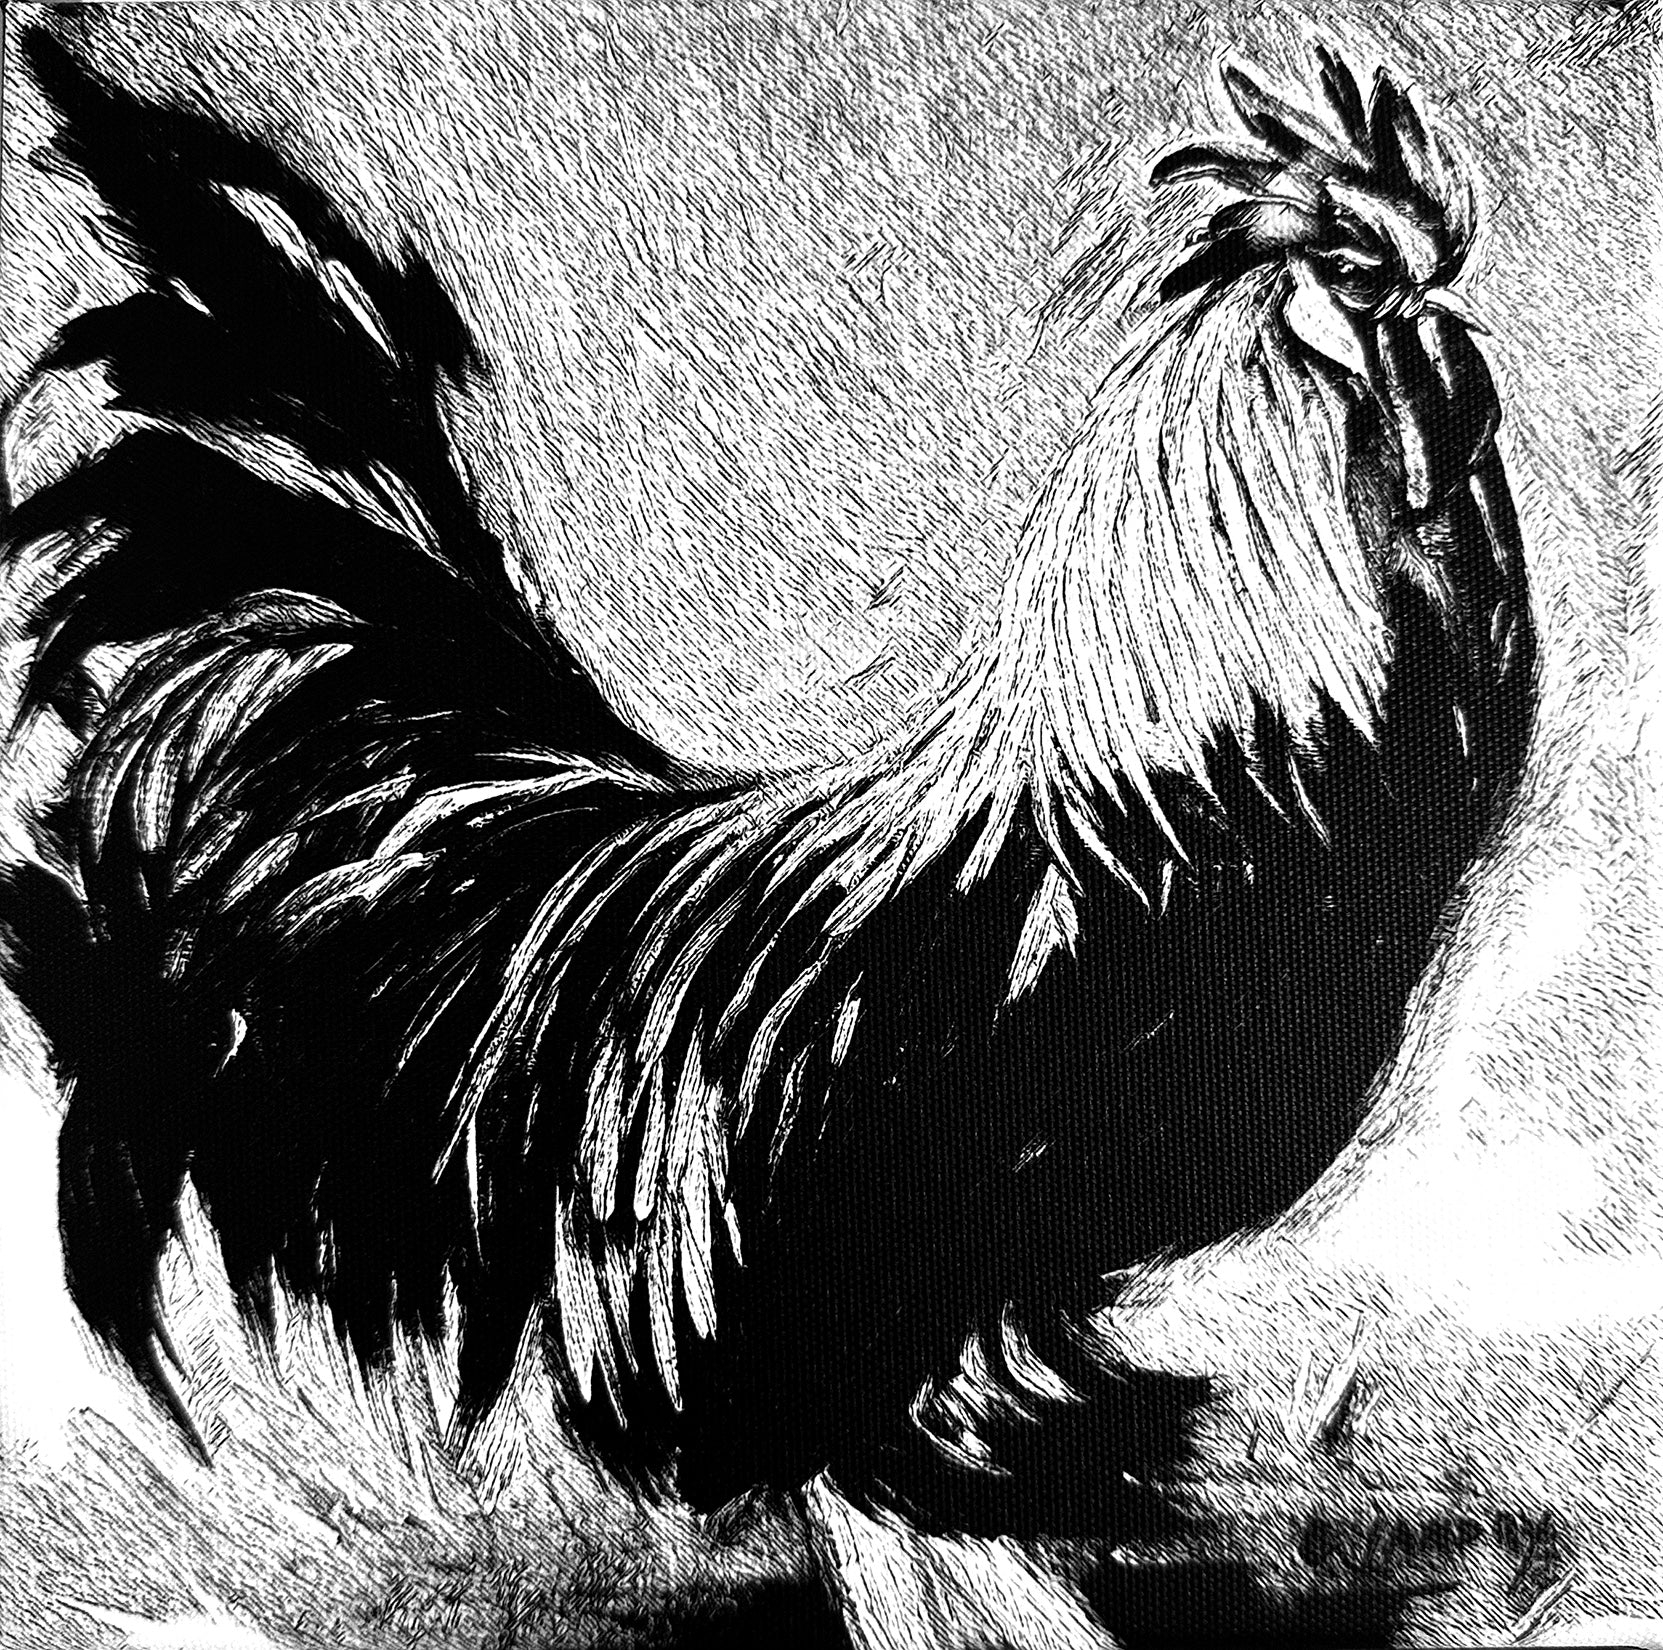 Rooster Design, Black & White, 8"x 8" Copy on Canvas